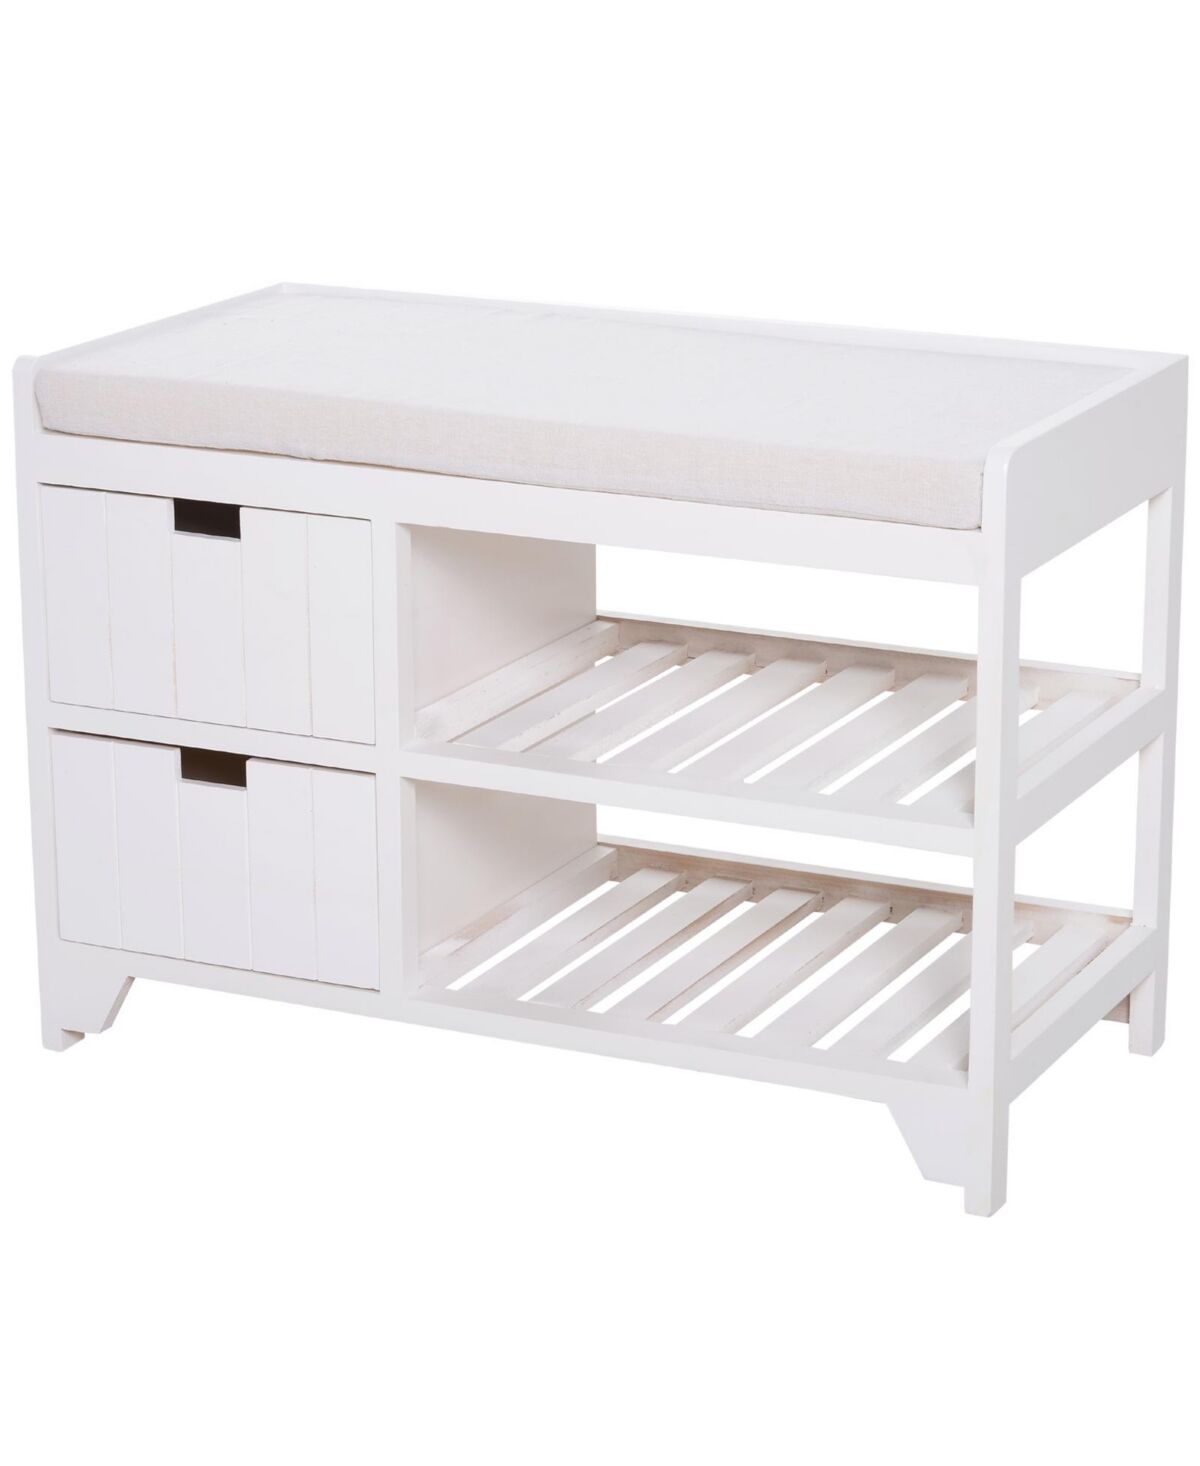 Homcom Shoe Cabinet, Wooden Storage Bench with Cushion, Entryway Rack with Drawers, Open Shelves, Country White - White